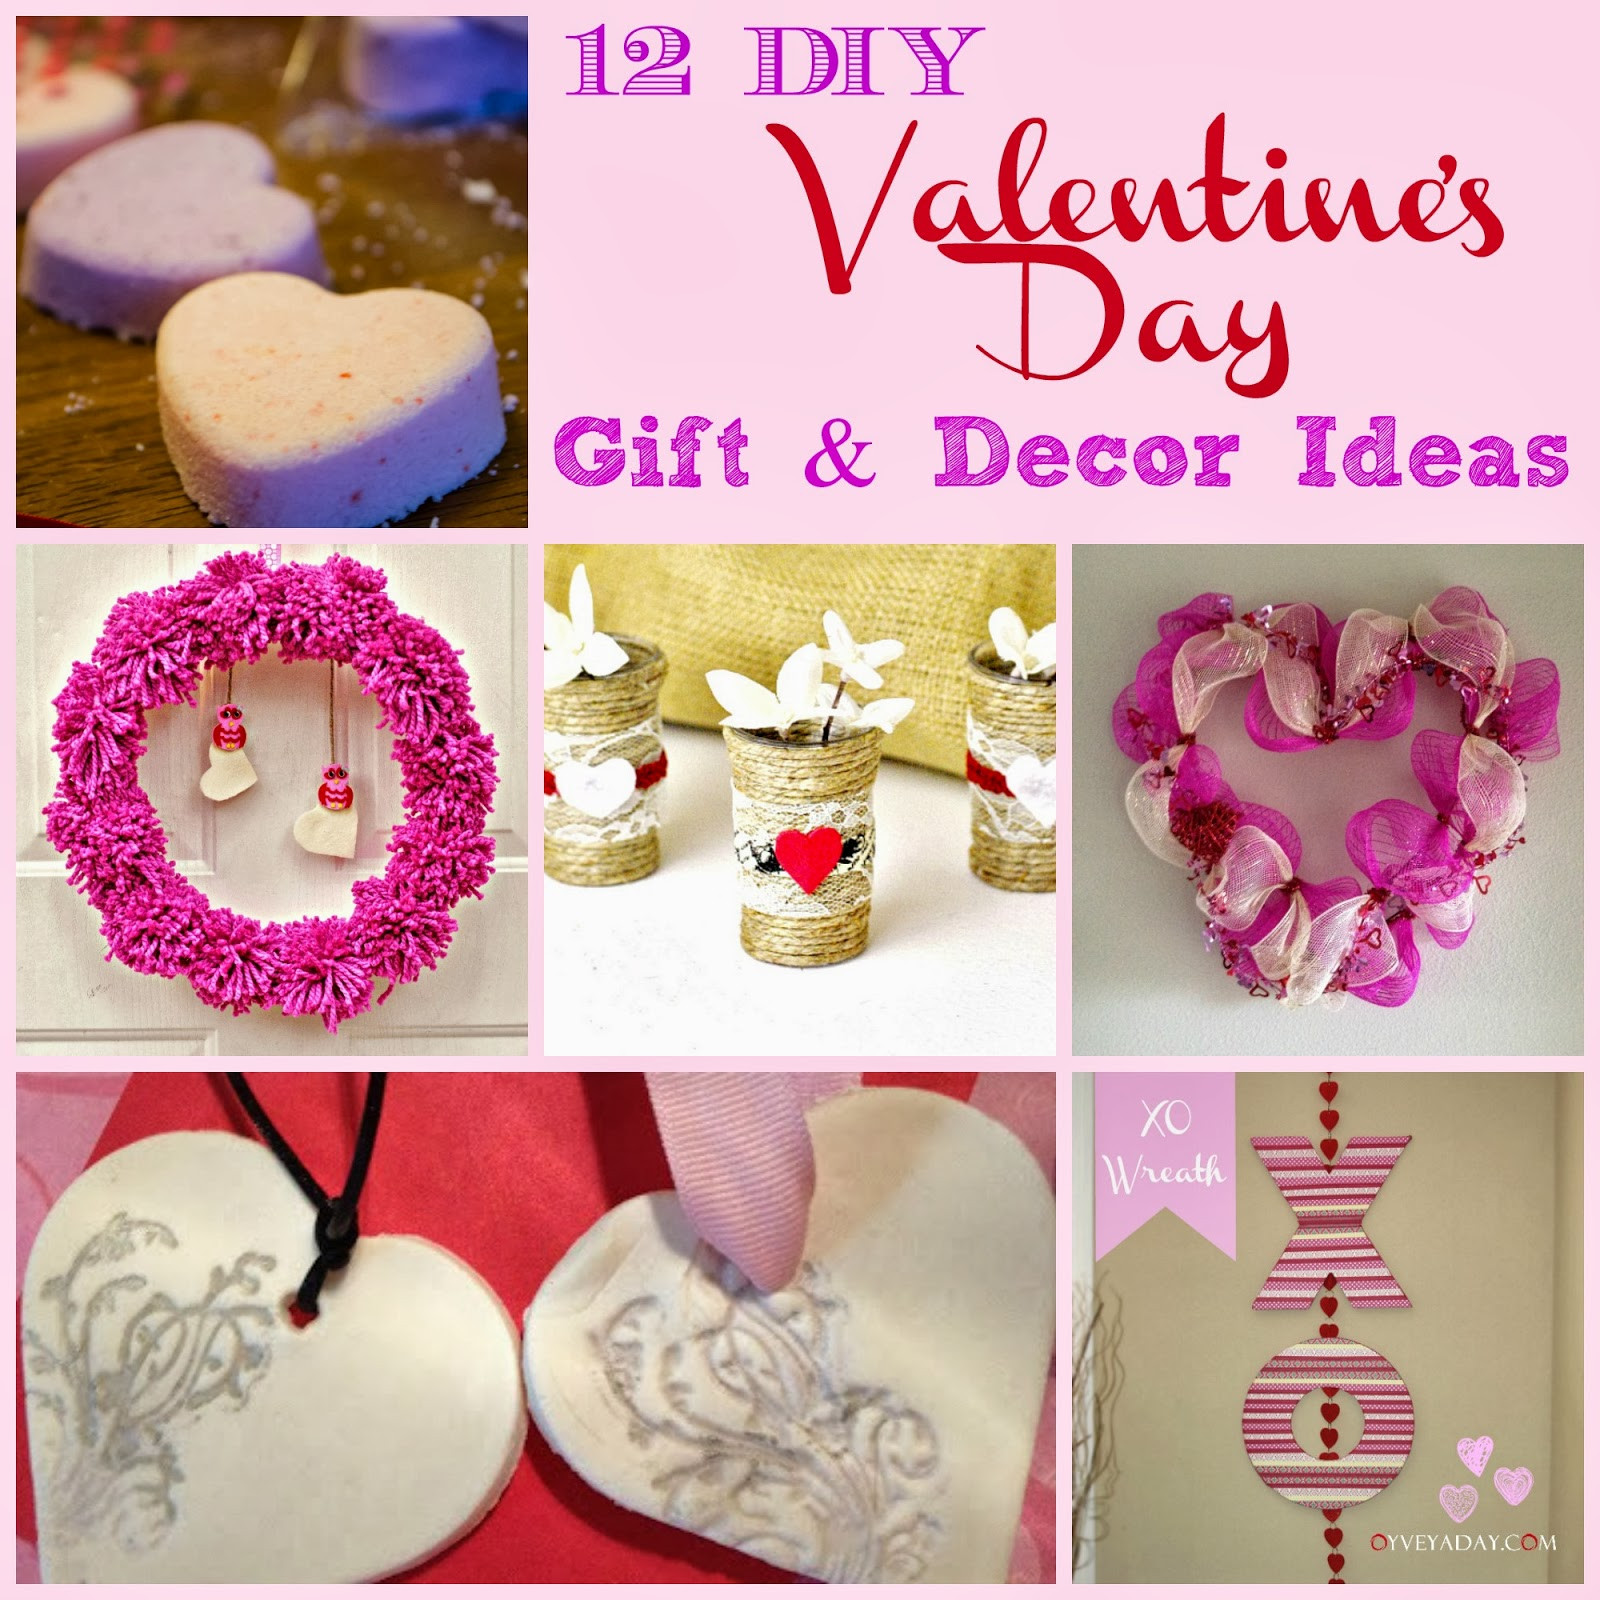 Valentines Day Handmade Gift Ideas
 12 DIY Valentine s Day Gift & Decor Ideas Outnumbered 3 to 1